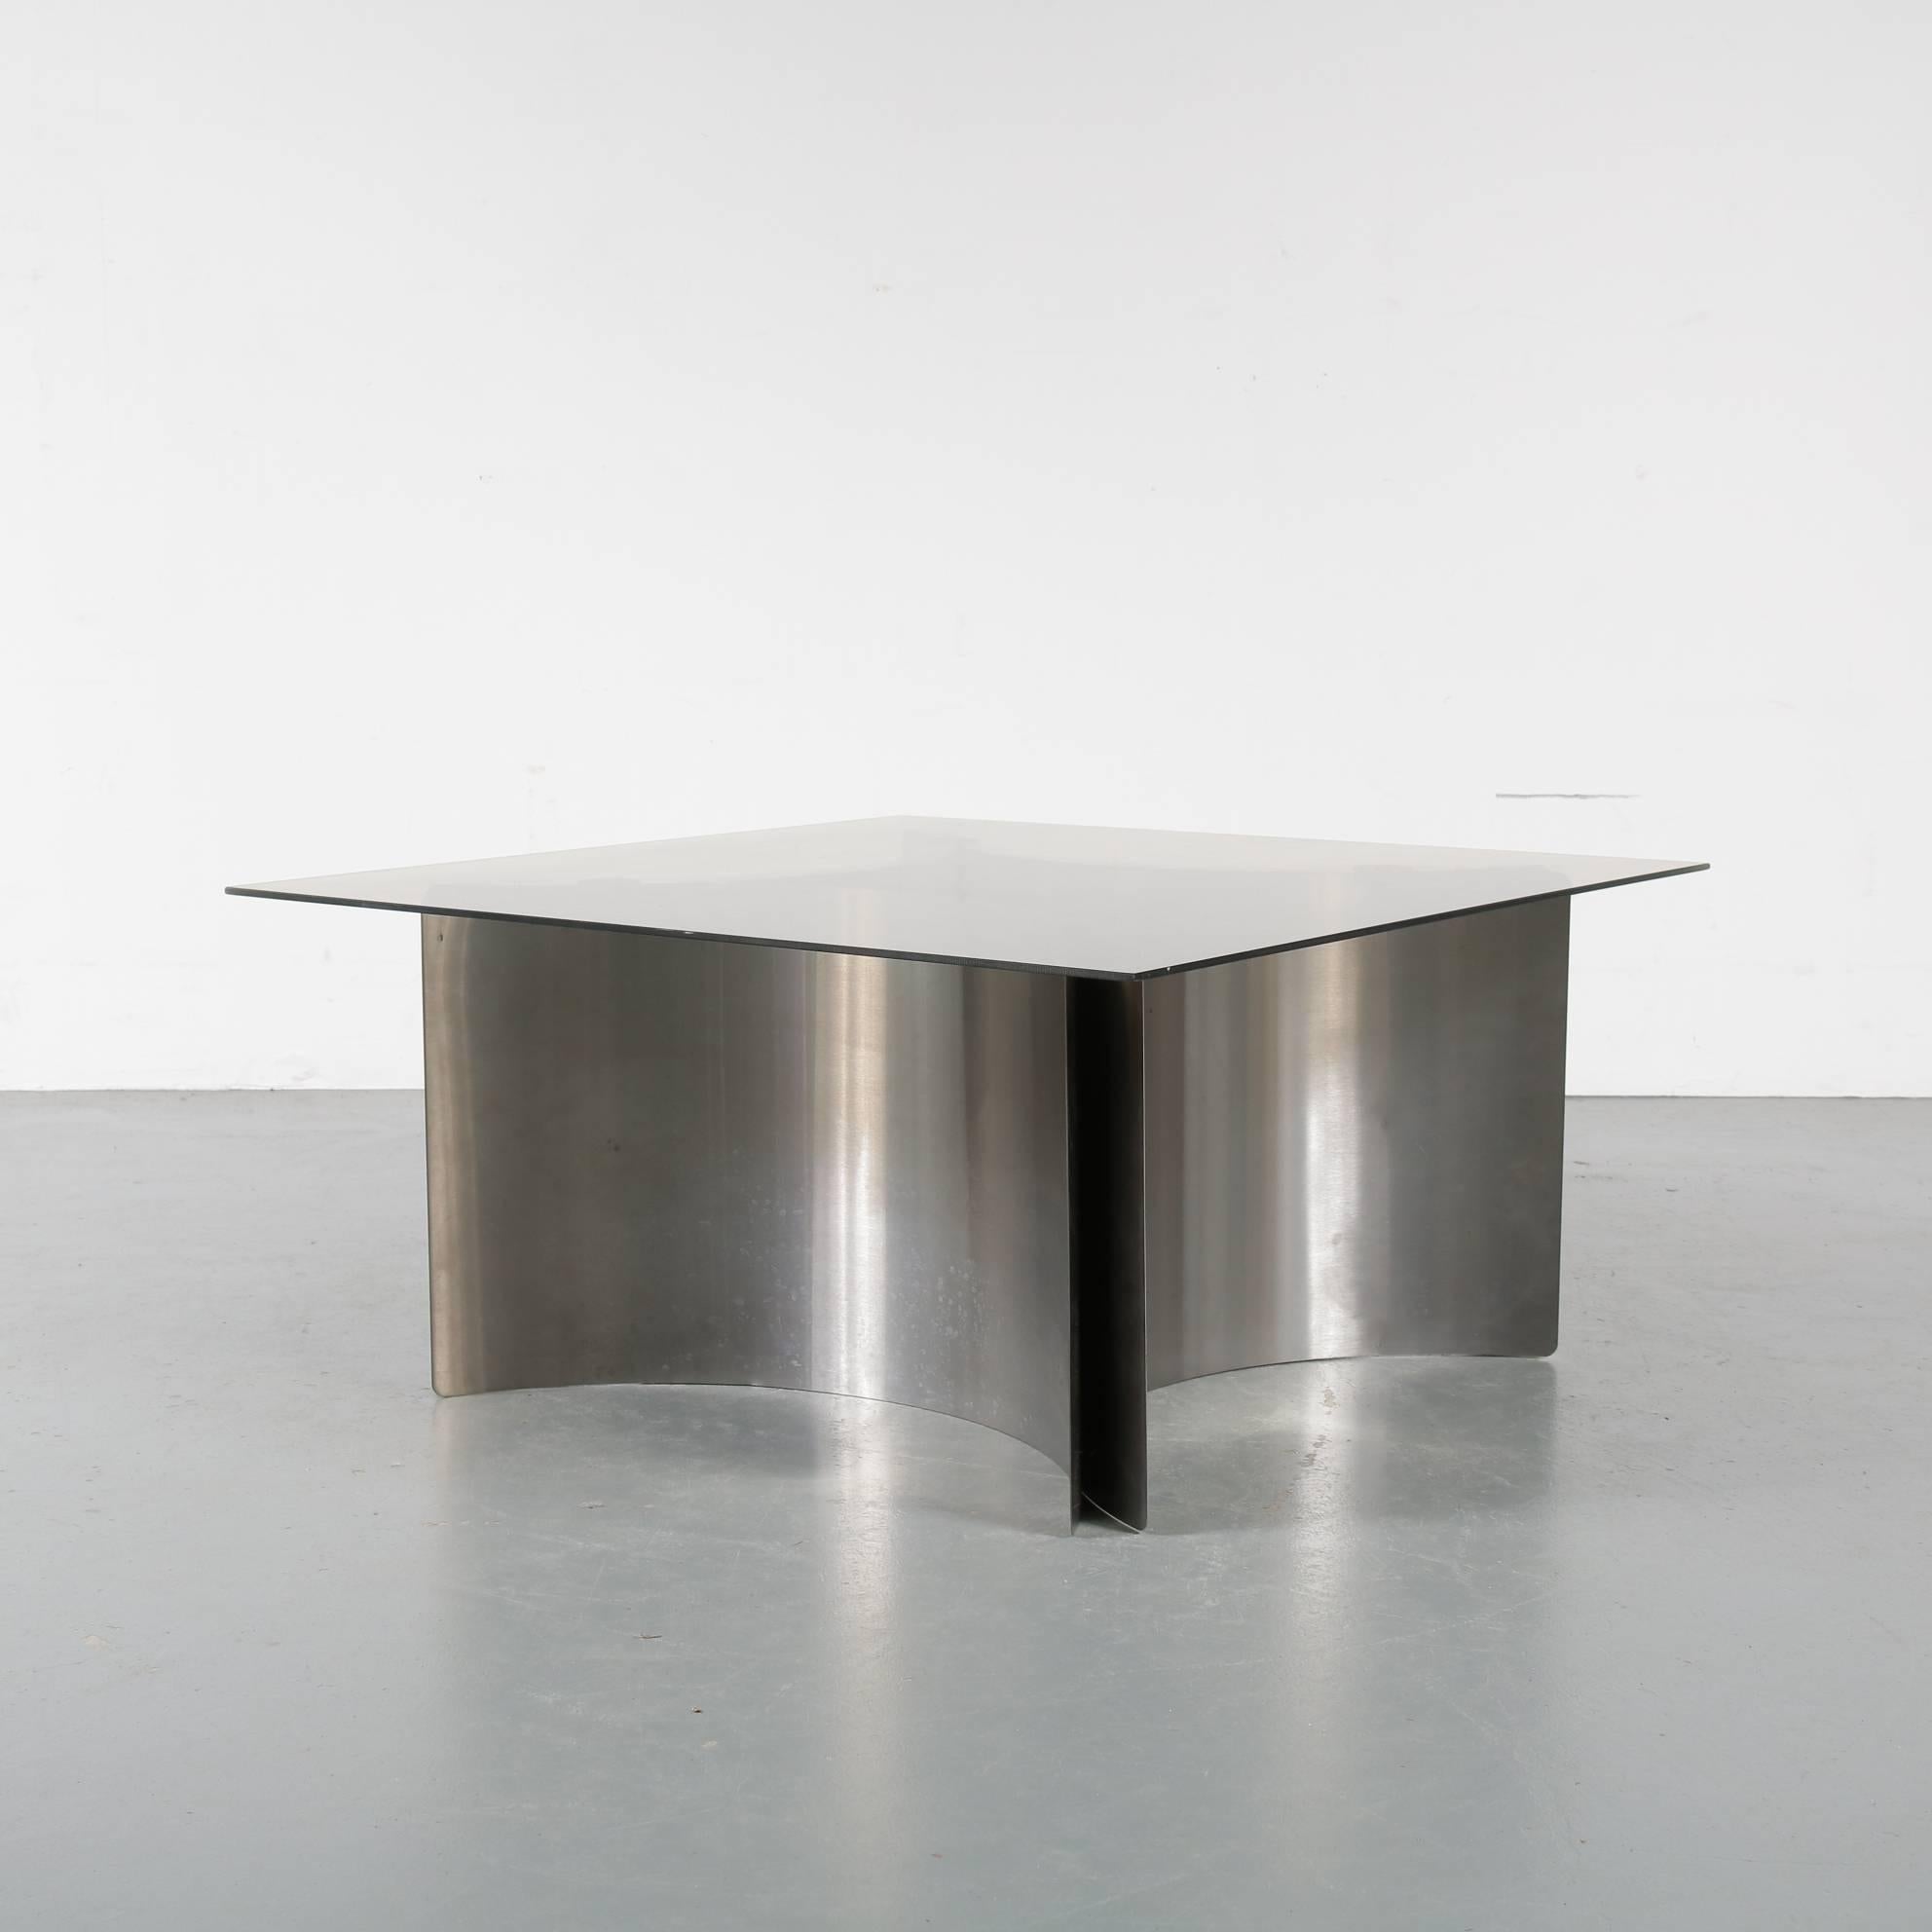 Plated Ringo Starr Attributed Coffee Table, United Kingdom, 1970